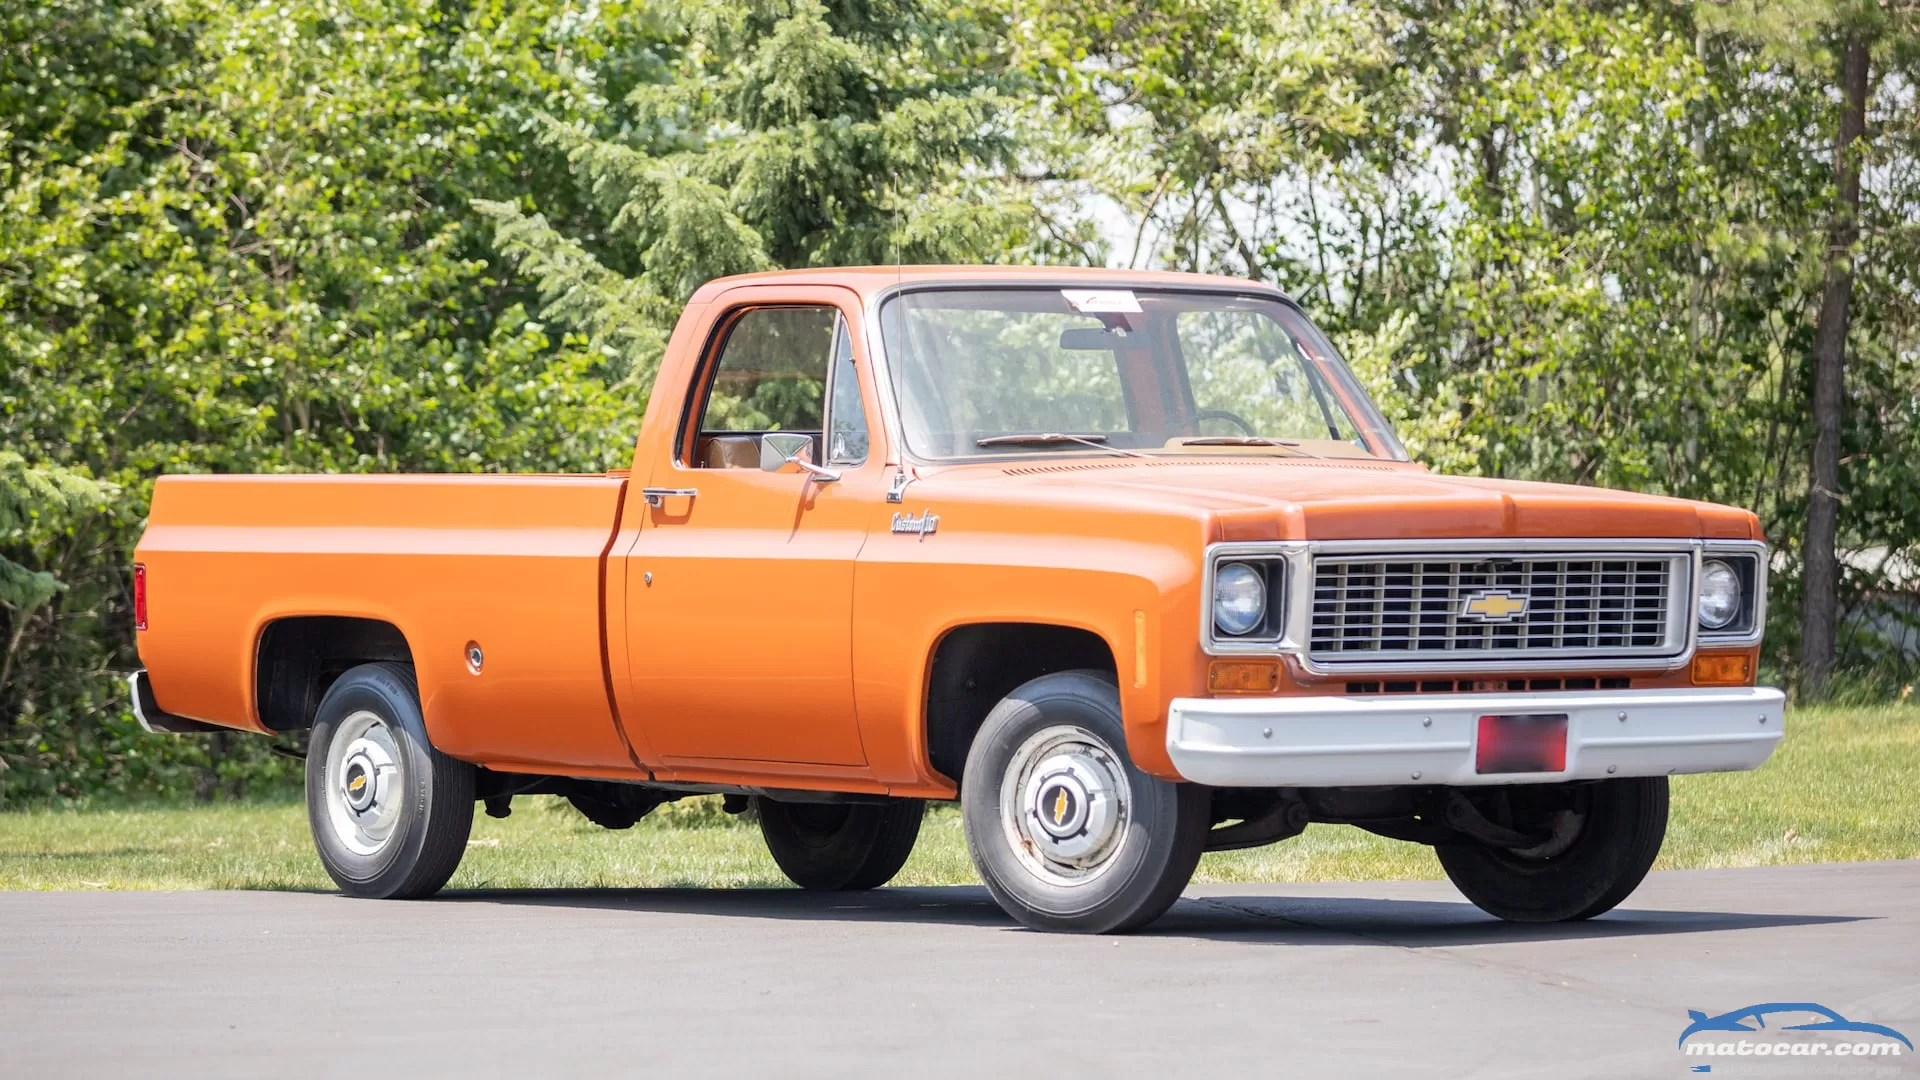 All-Original 1974 Chevy C10 Is a Classic Time-Warp